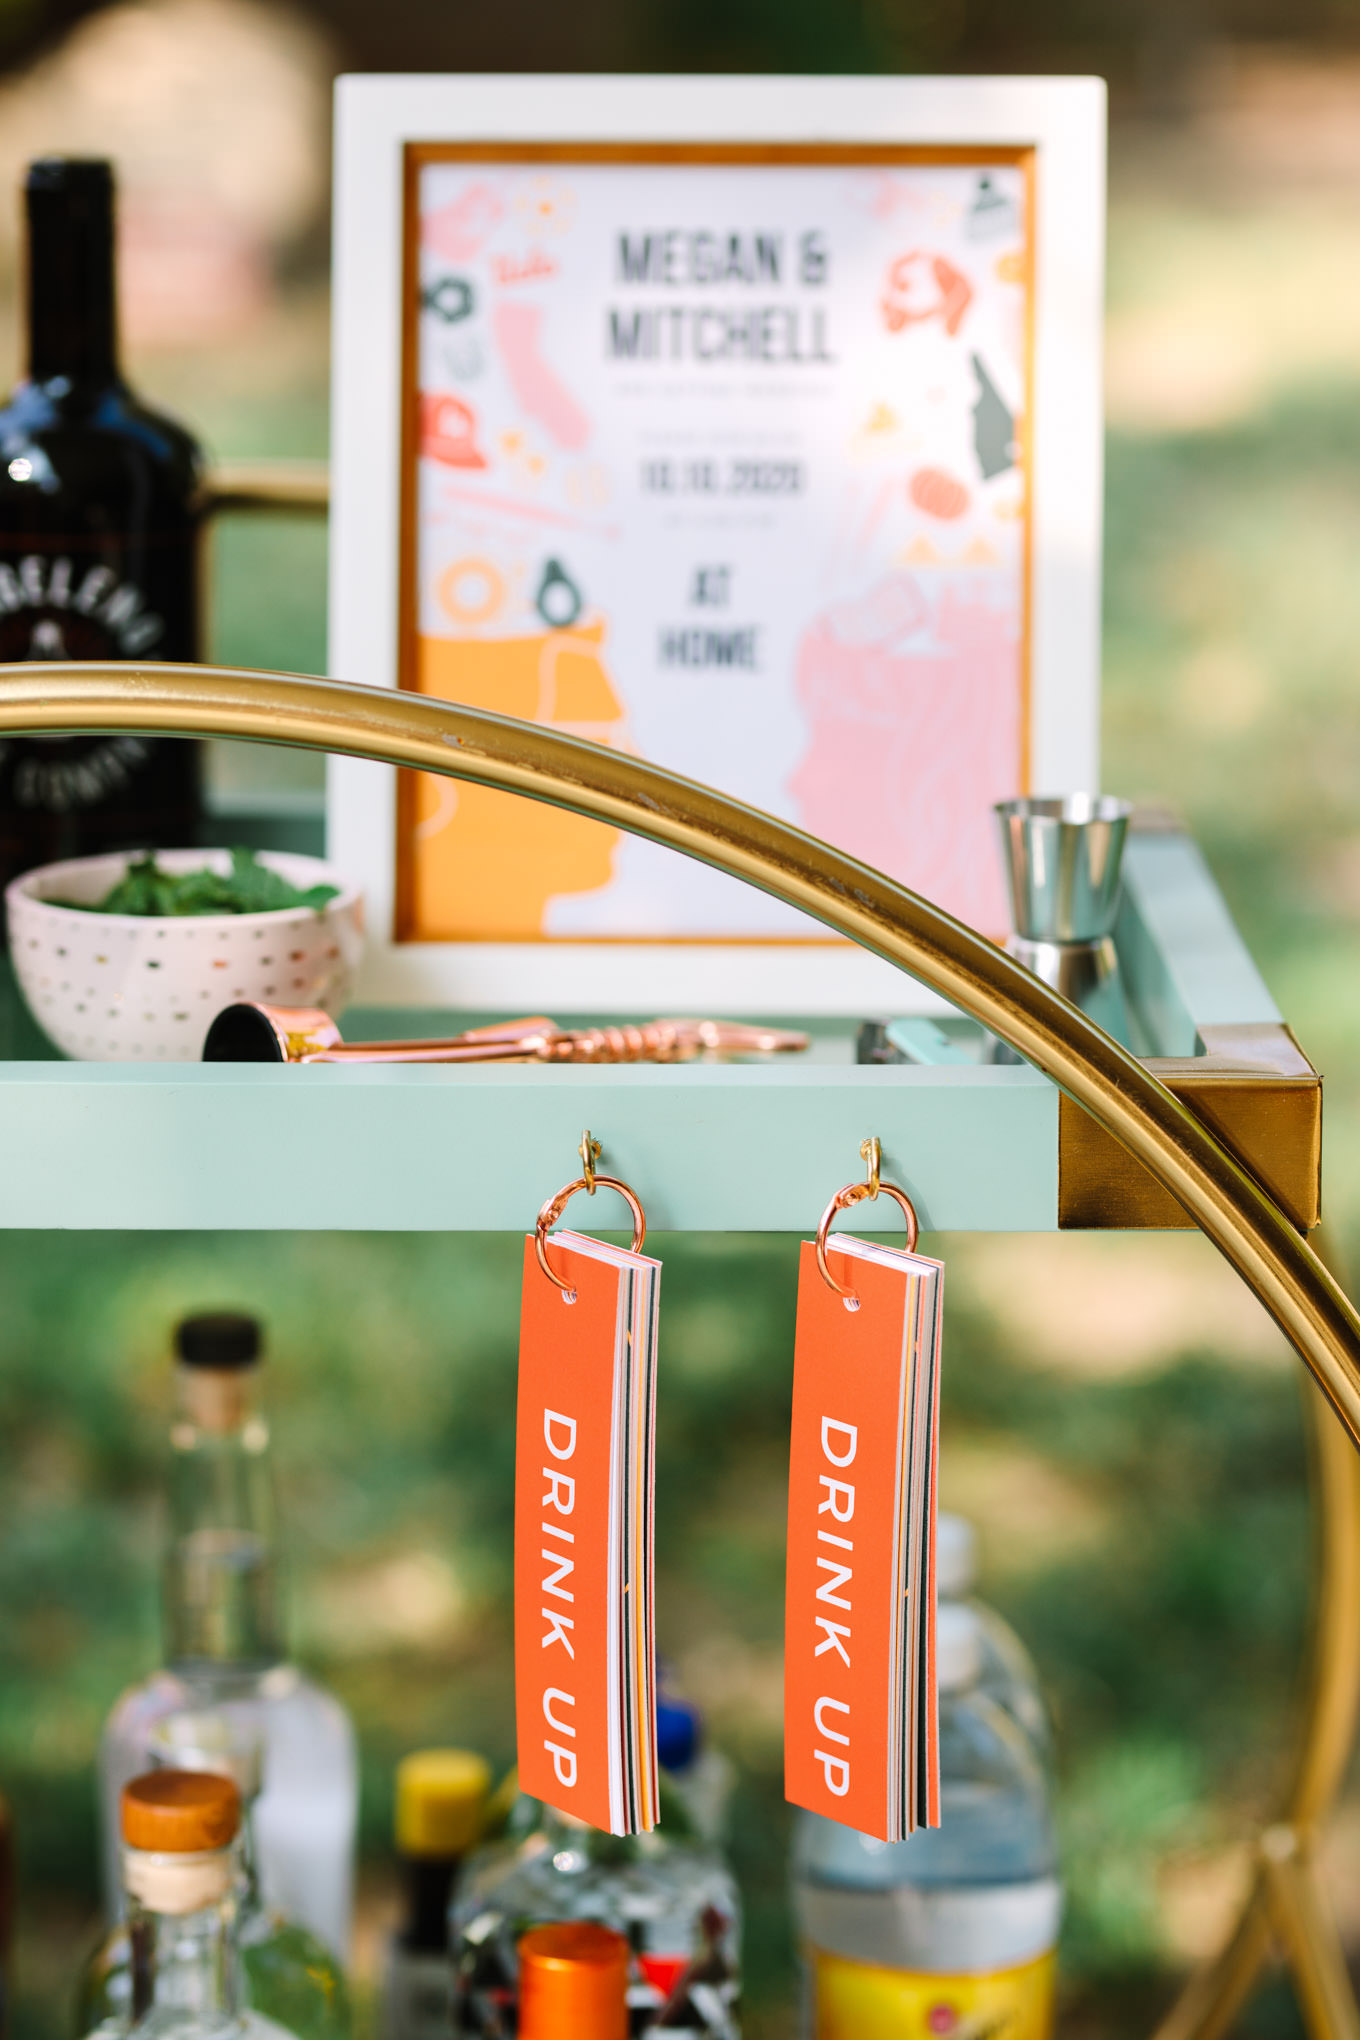 Close up of unique wedding cart idea with drink menu | Vibrant backyard micro wedding featured on Green Wedding Shoes | Colorful LA wedding photography | #losangeleswedding #backyardwedding #microwedding #laweddingphotographer Source: Mary Costa Photography | Los Angeles